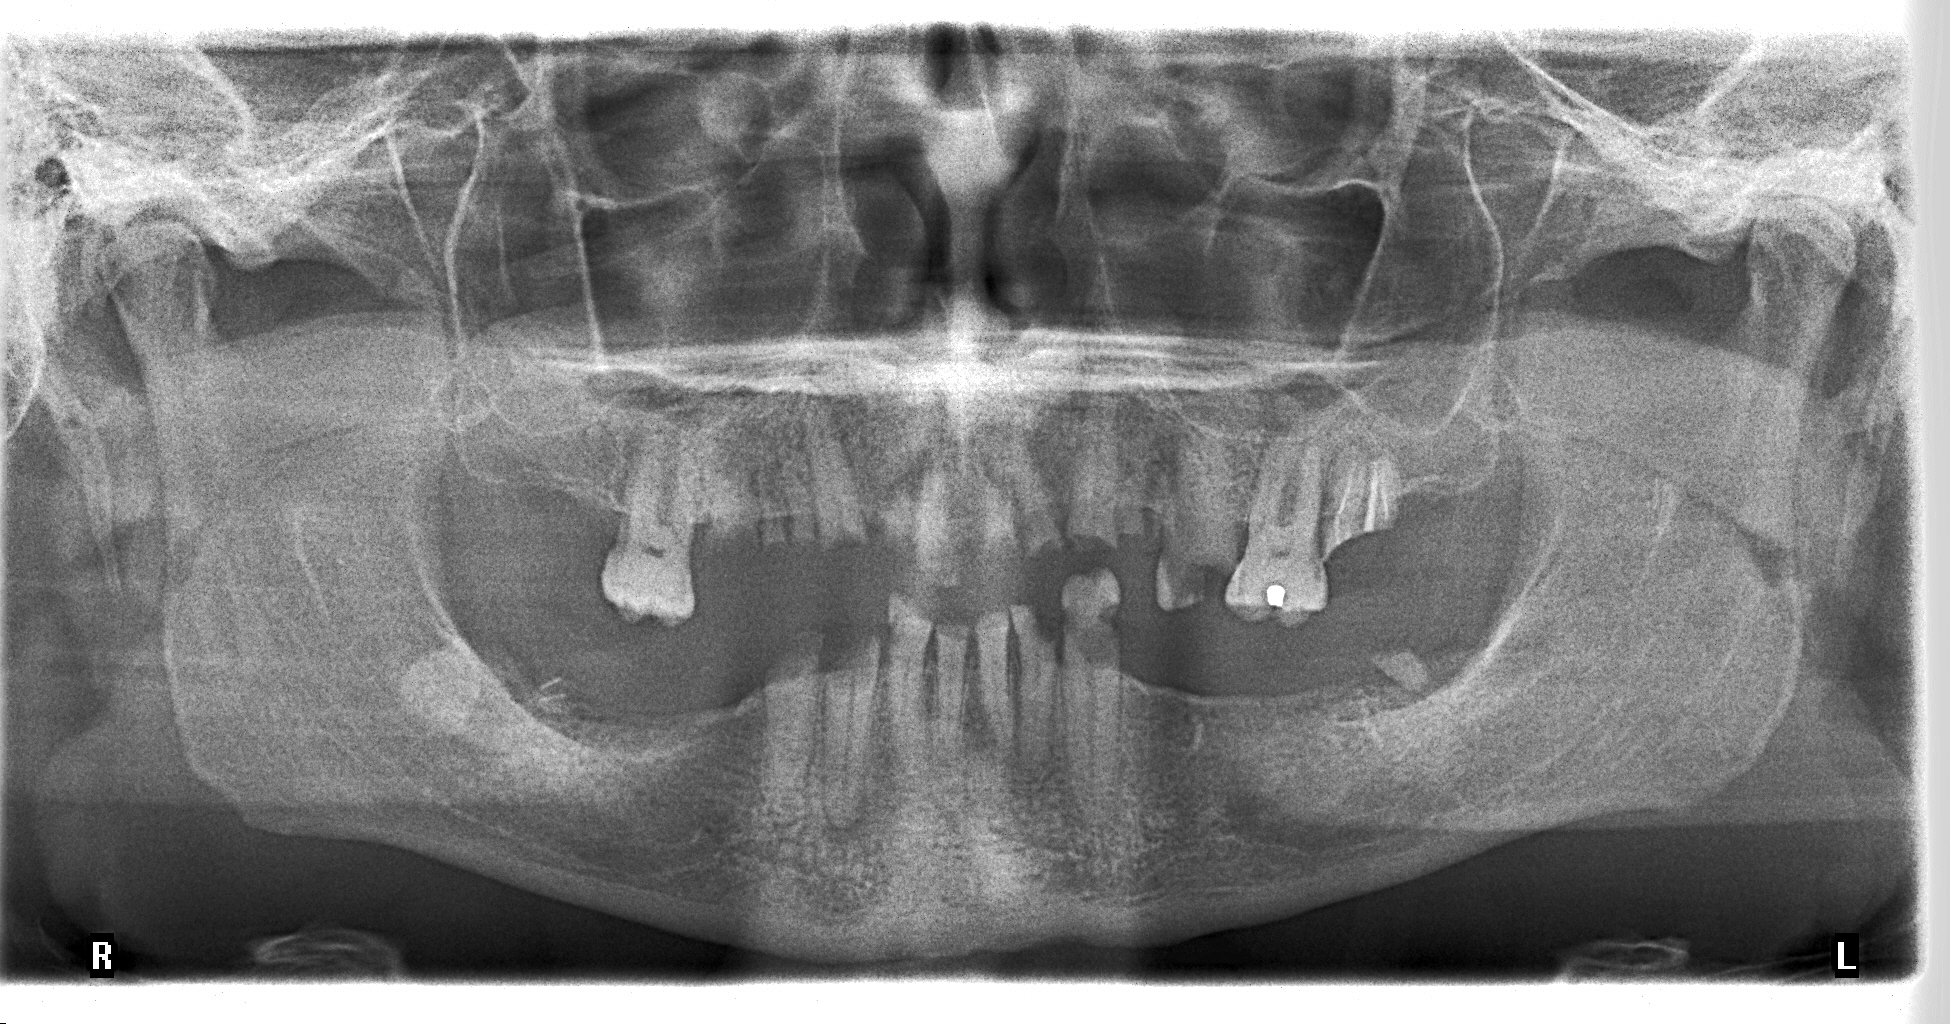 Getting dental implants in Costa Rica? You need a digital Panoramic X-ray.